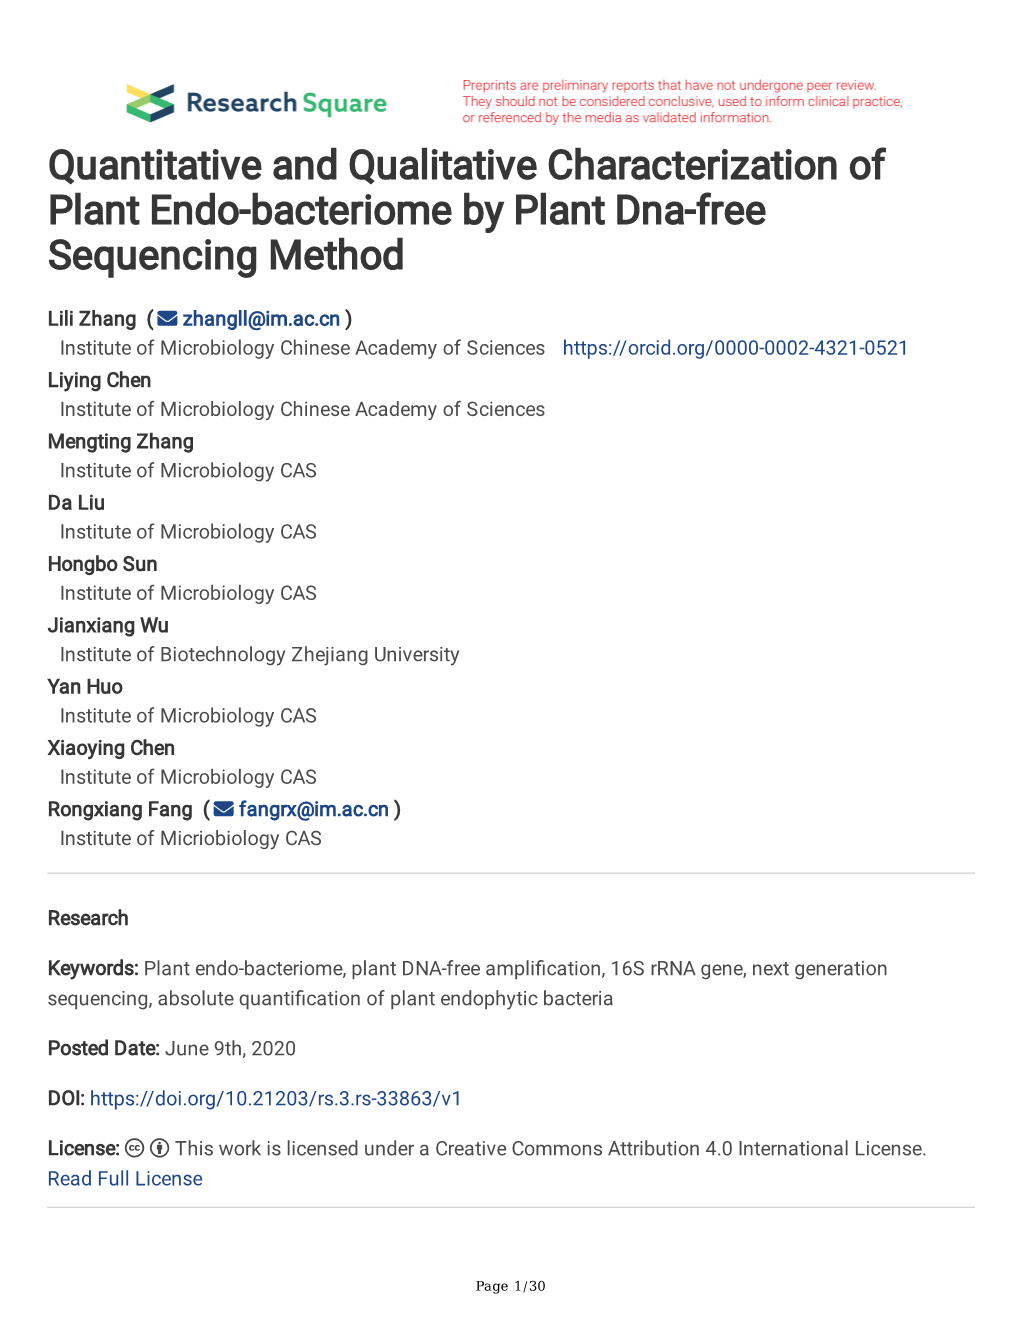 Quantitative and Qualitative Characterization of Plant Endo-Bacteriome by Plant Dna-Free Sequencing Method